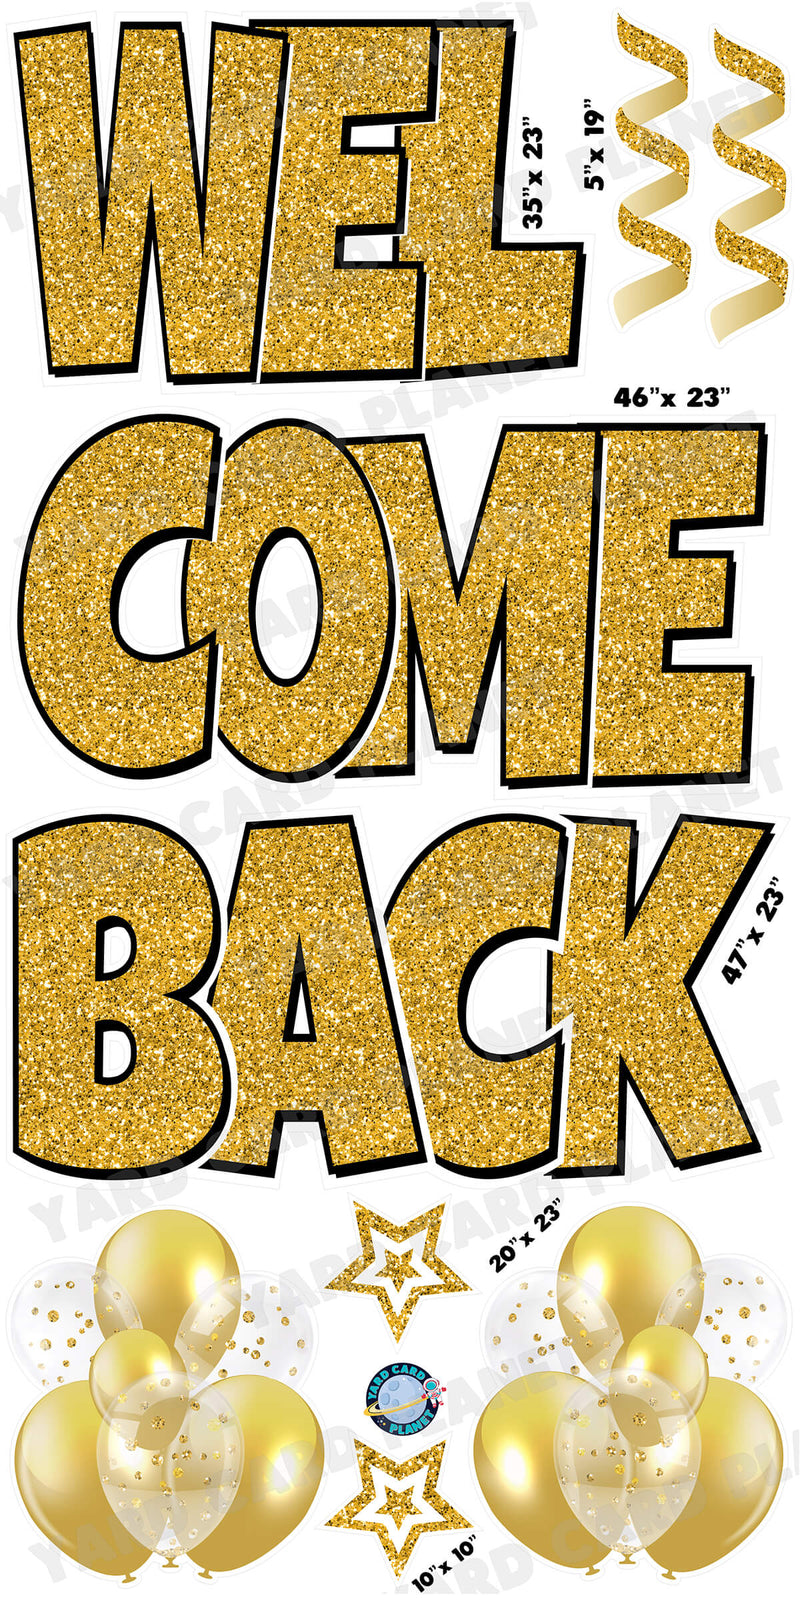 Large 23" Welcome Back Yard Card EZ Quick Sets in Luckiest Guy Font and Flair in Glitter Pattern (Available in Multiple Colors)